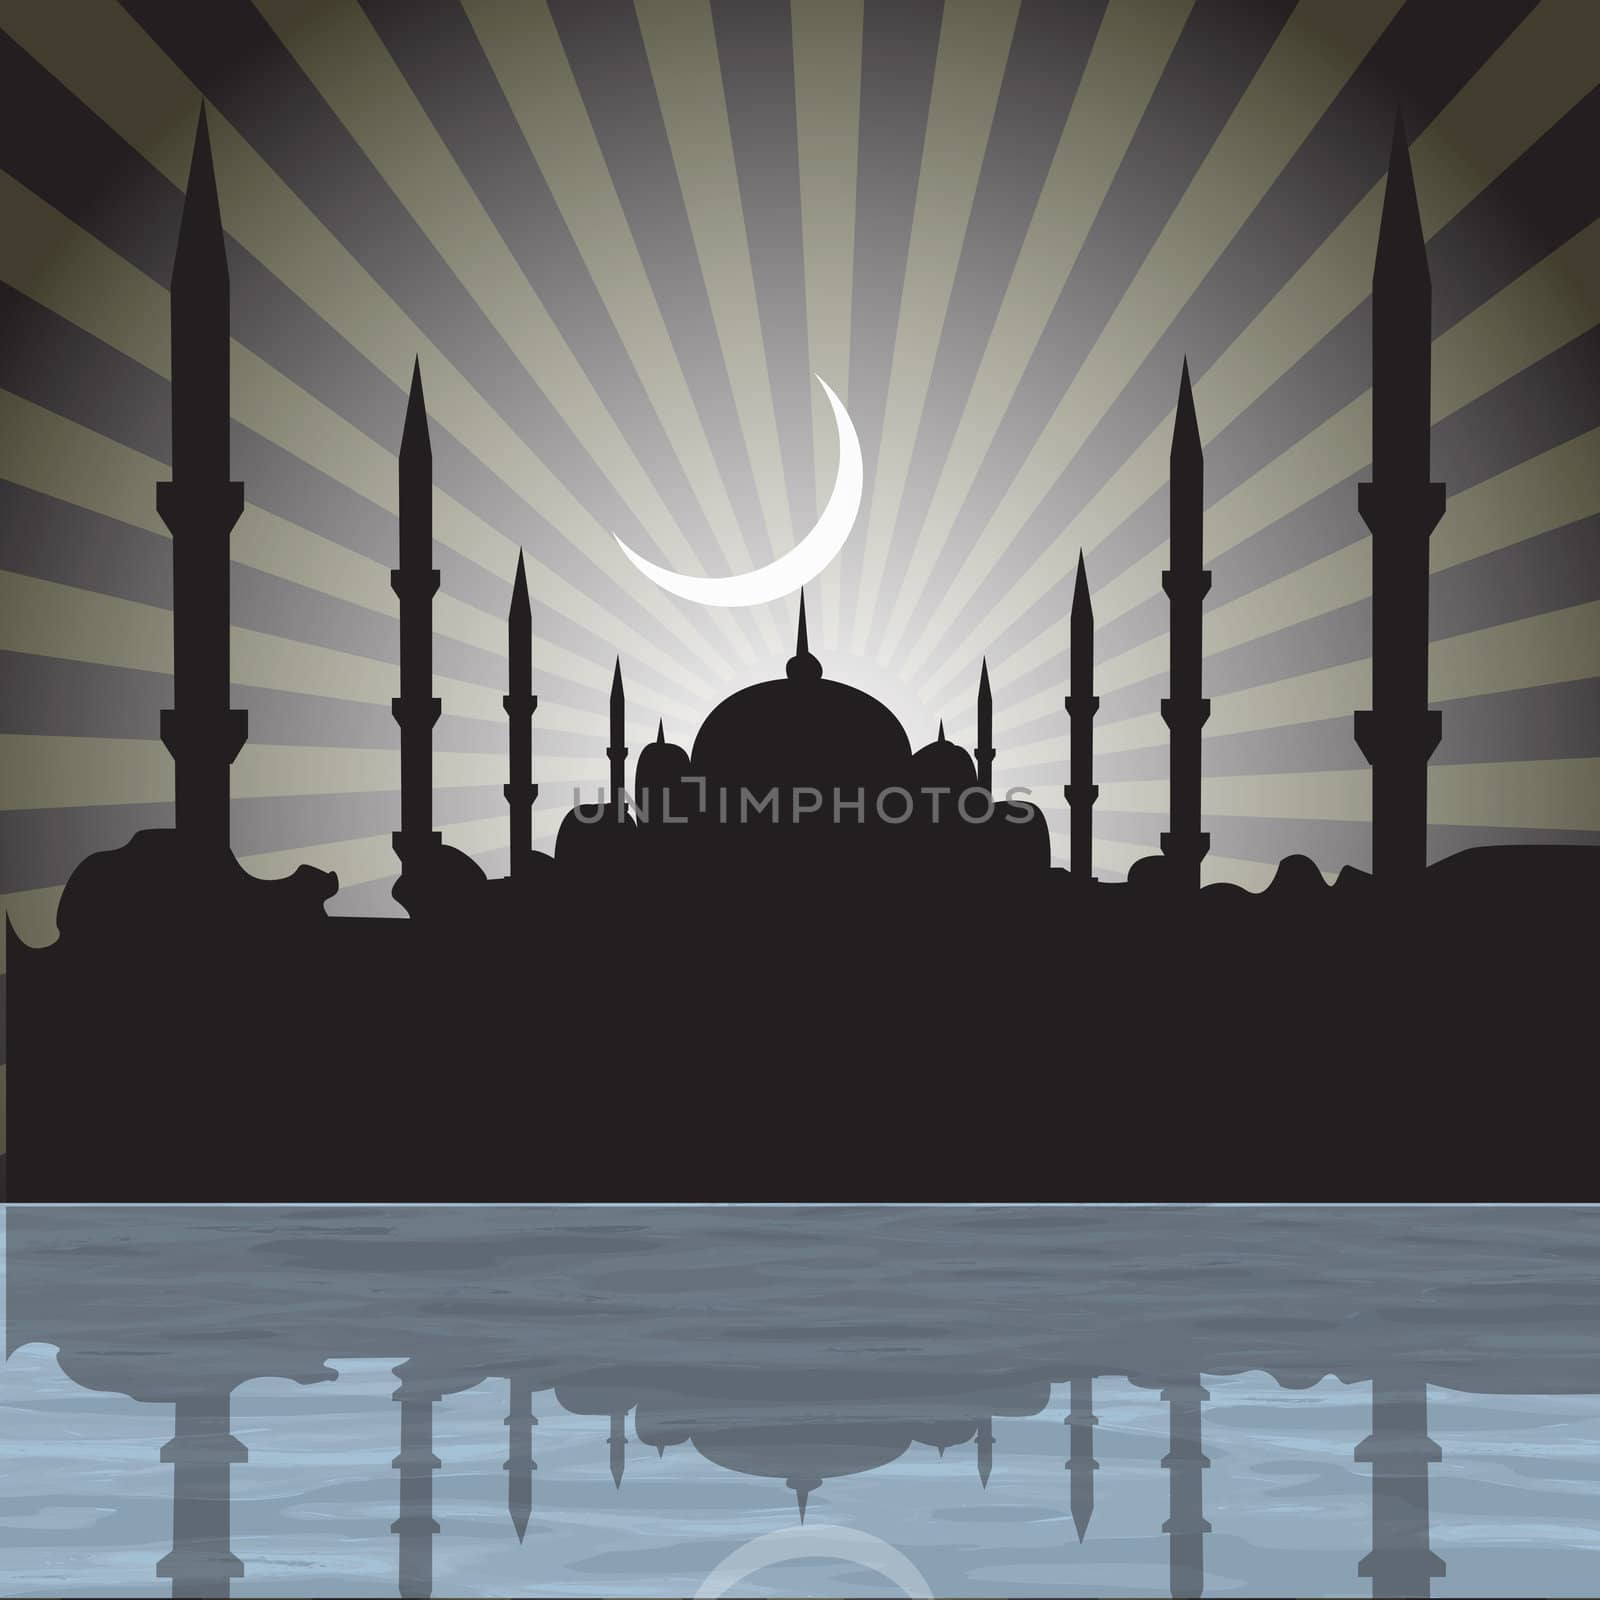 silhouette of a mosque with rays, moon background by abhishek4383